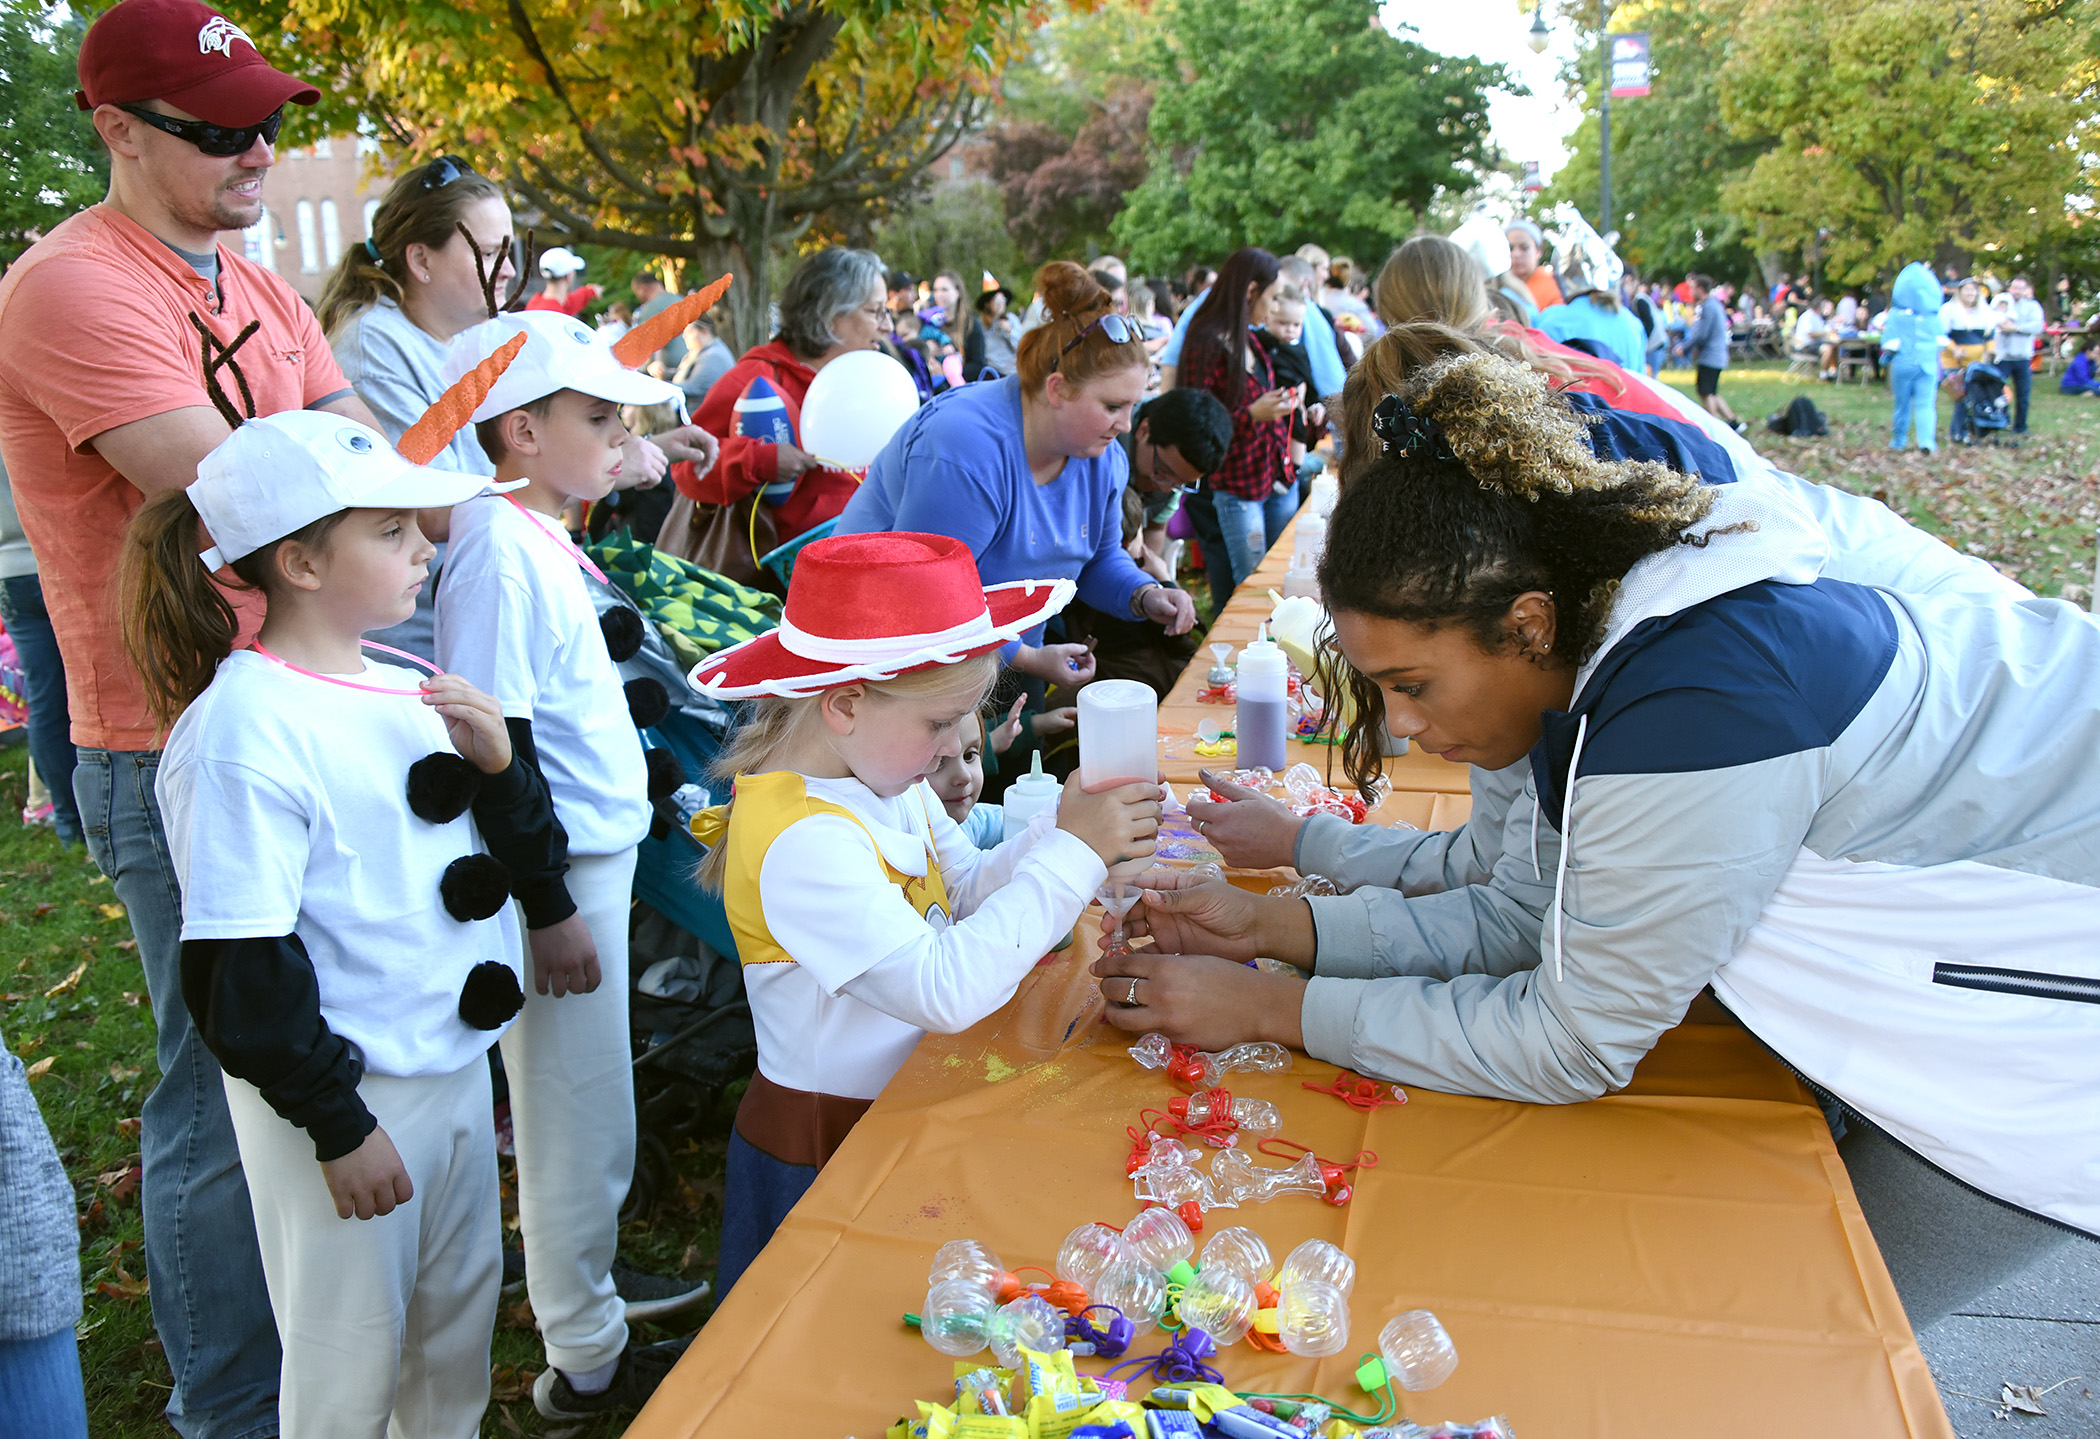 Ship's annual community Halloween fair is made possible by student volunteers and organizations.